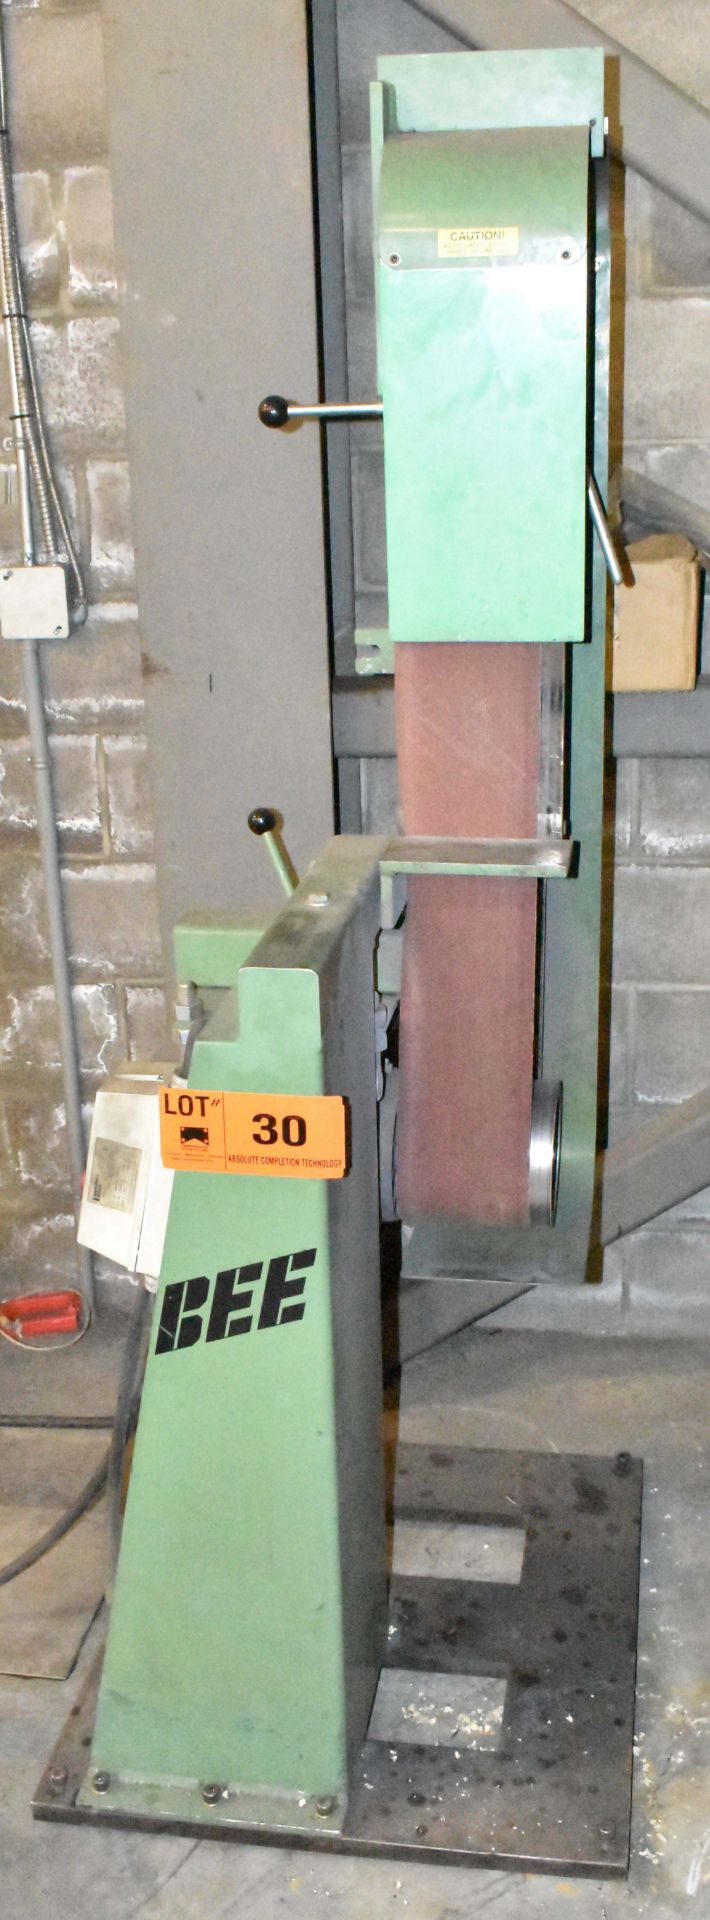 BEE 6" VERTICAL BELT SANDER [RIGGING FEES FOR LOT #30 - $25 USD PLUS APPLICABLE TAXES]